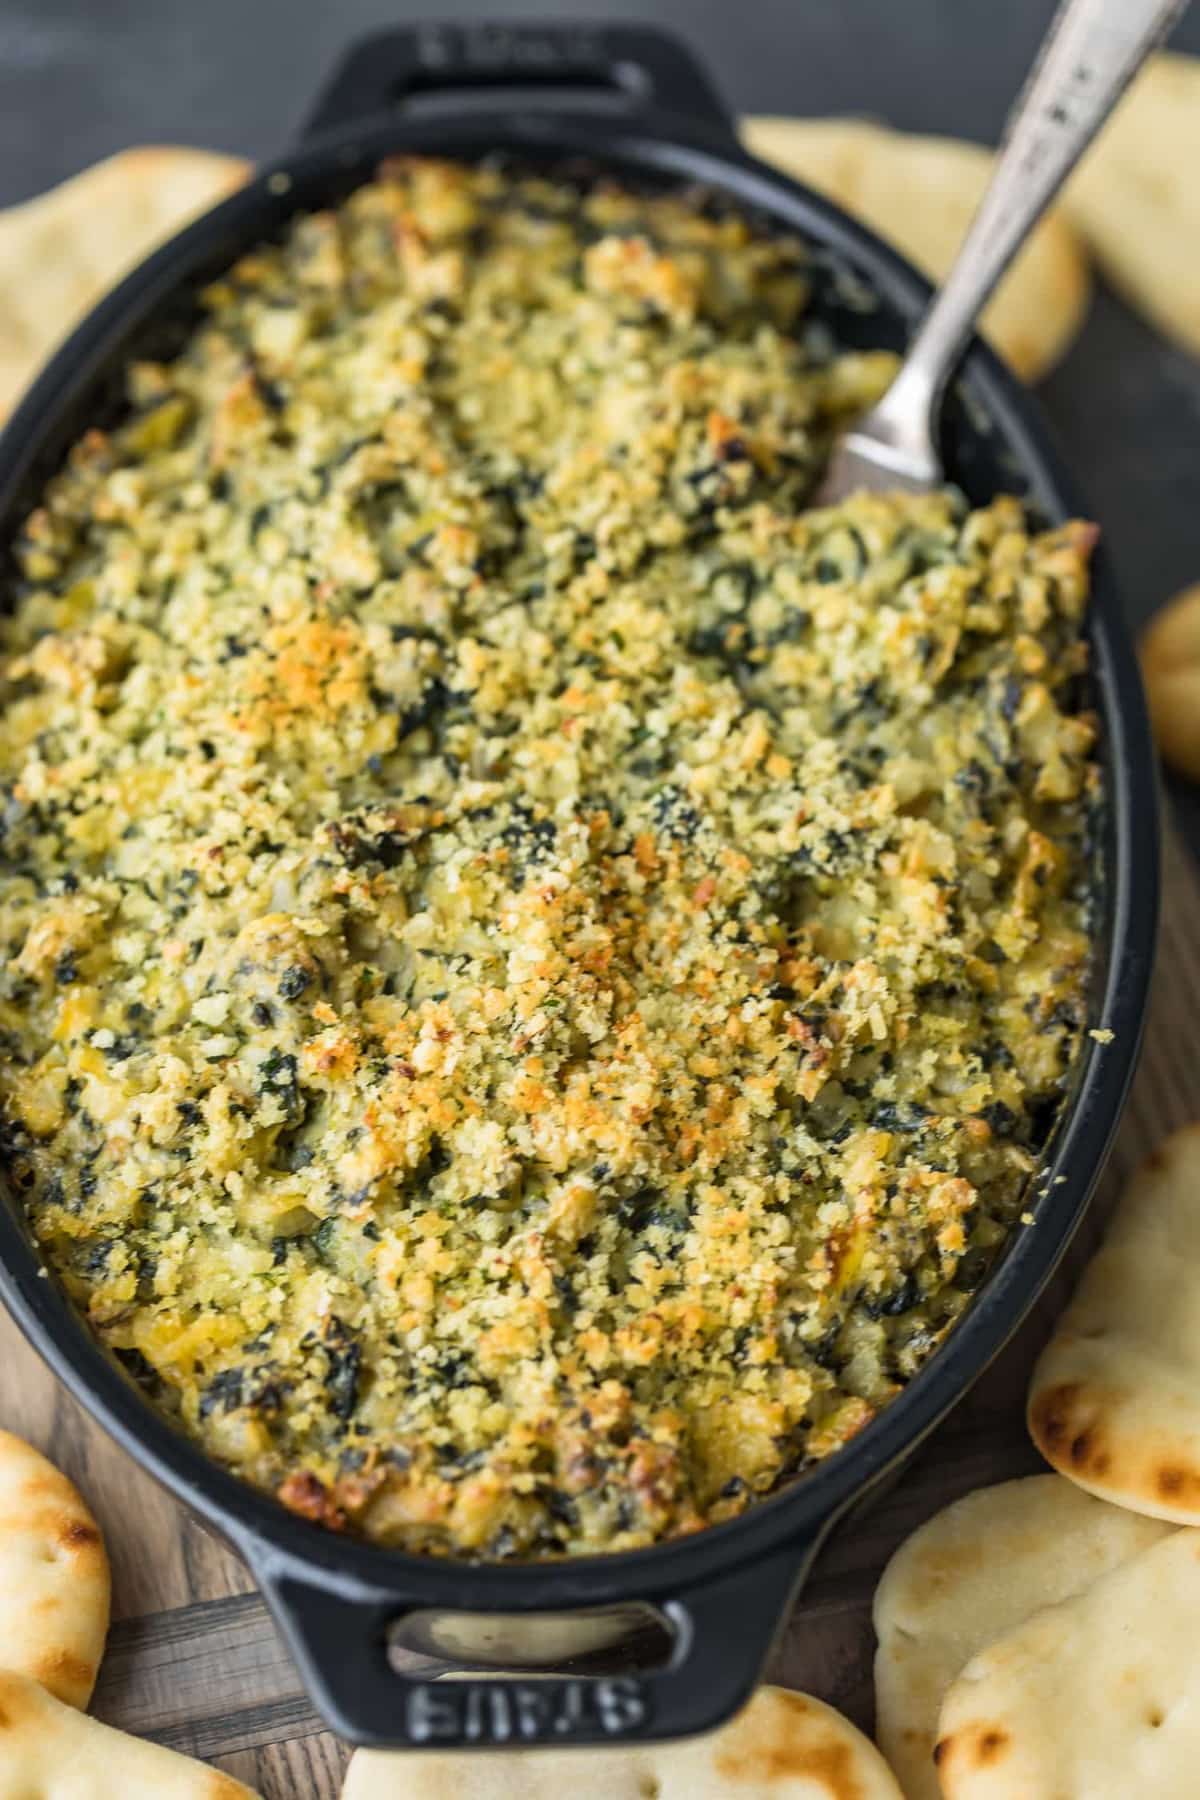 Spinach dip baked in a black skillet.